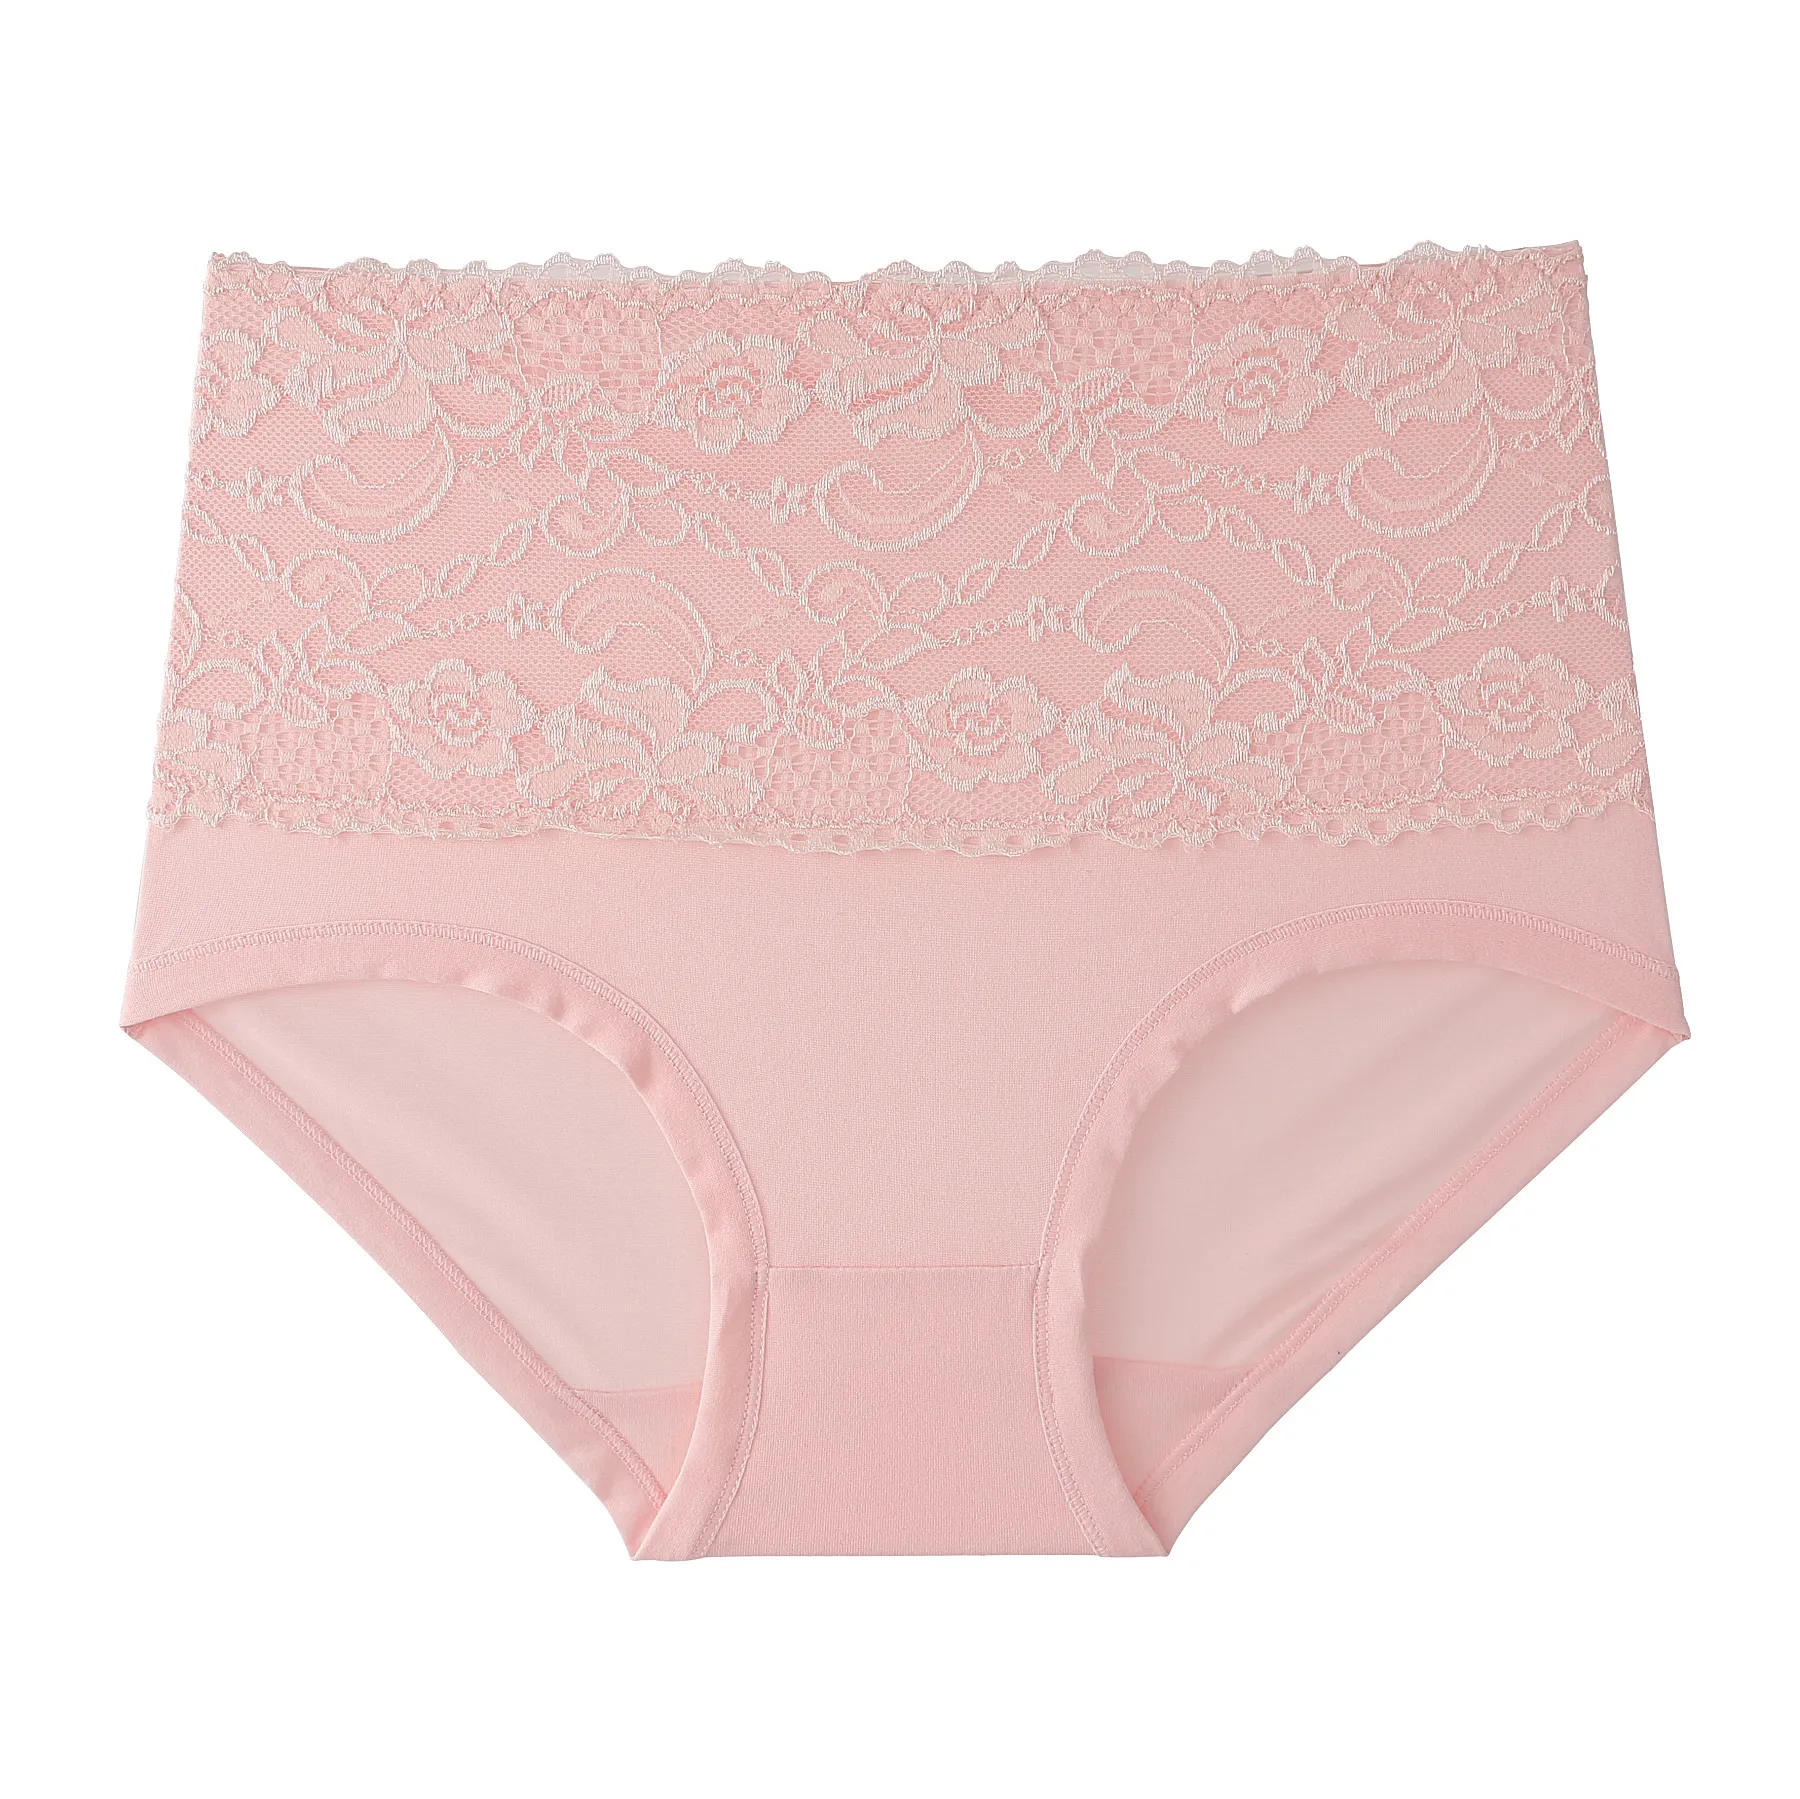 Wholesale Modal Cotton Lace Briefs With High Elasticity For Women And Girls  Sexy Lace Panties Knickers In L, XL, AndXXL Sizes From Vecute, $0.94